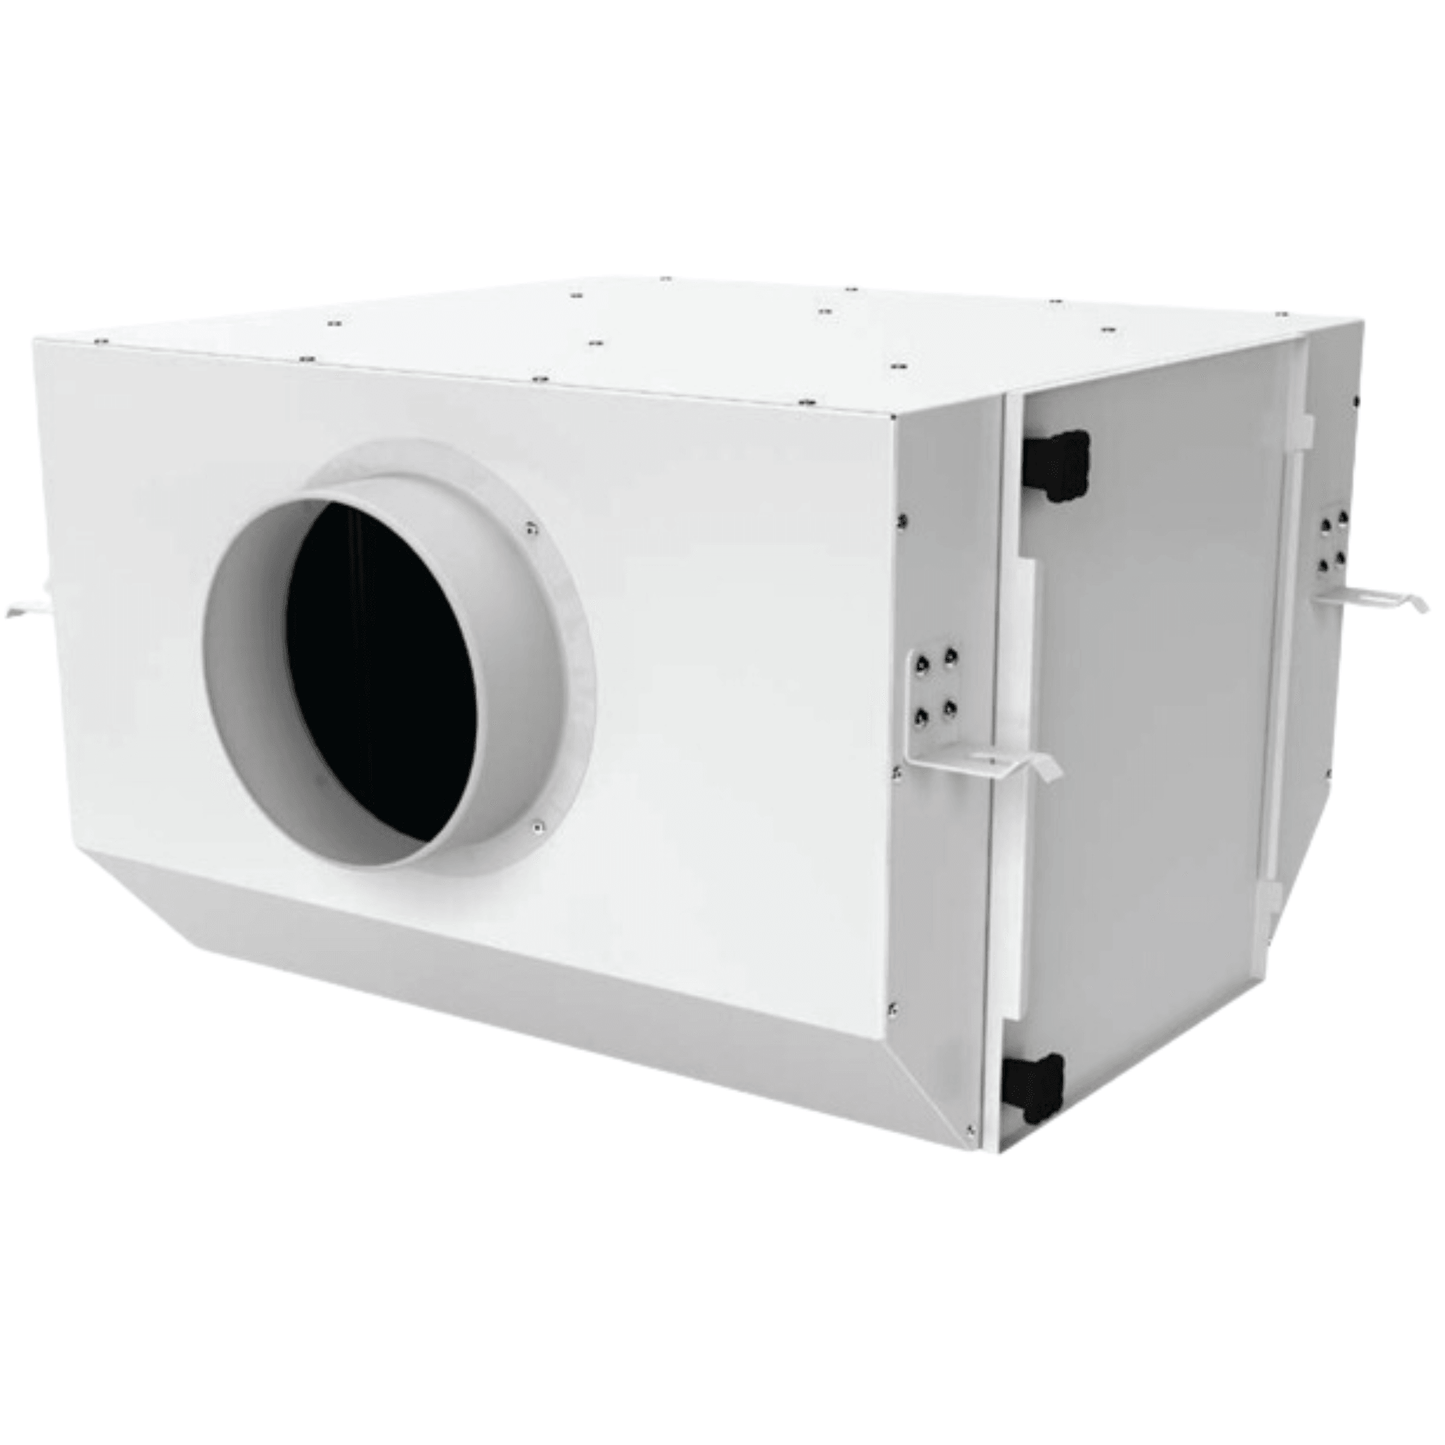 Vents FB K2 Series Inline Fan with Dual Filtration